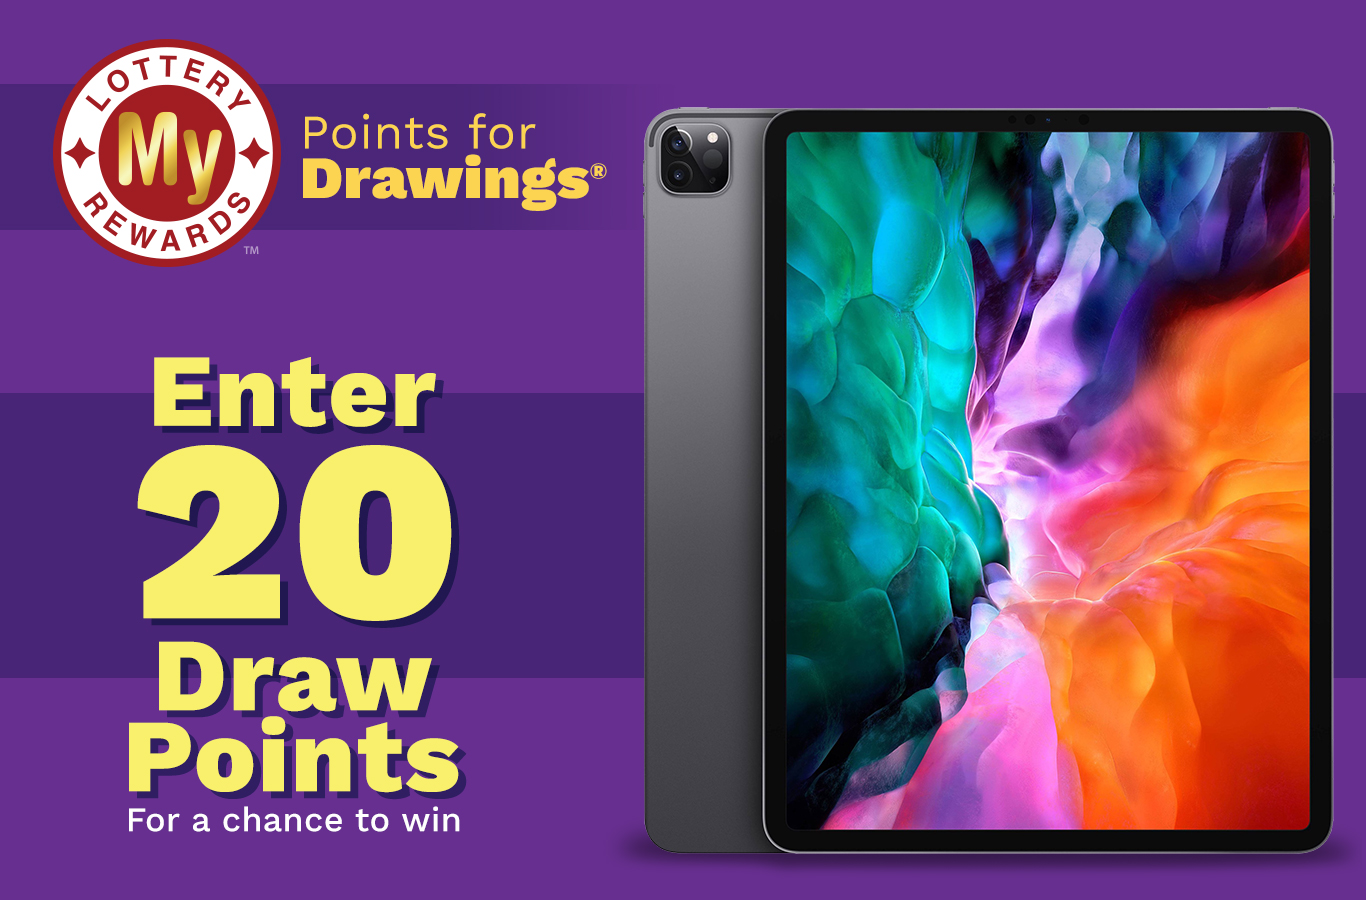 Here's your chance to win an Apple® iPad Pro! Enter by Monday, May 2nd.